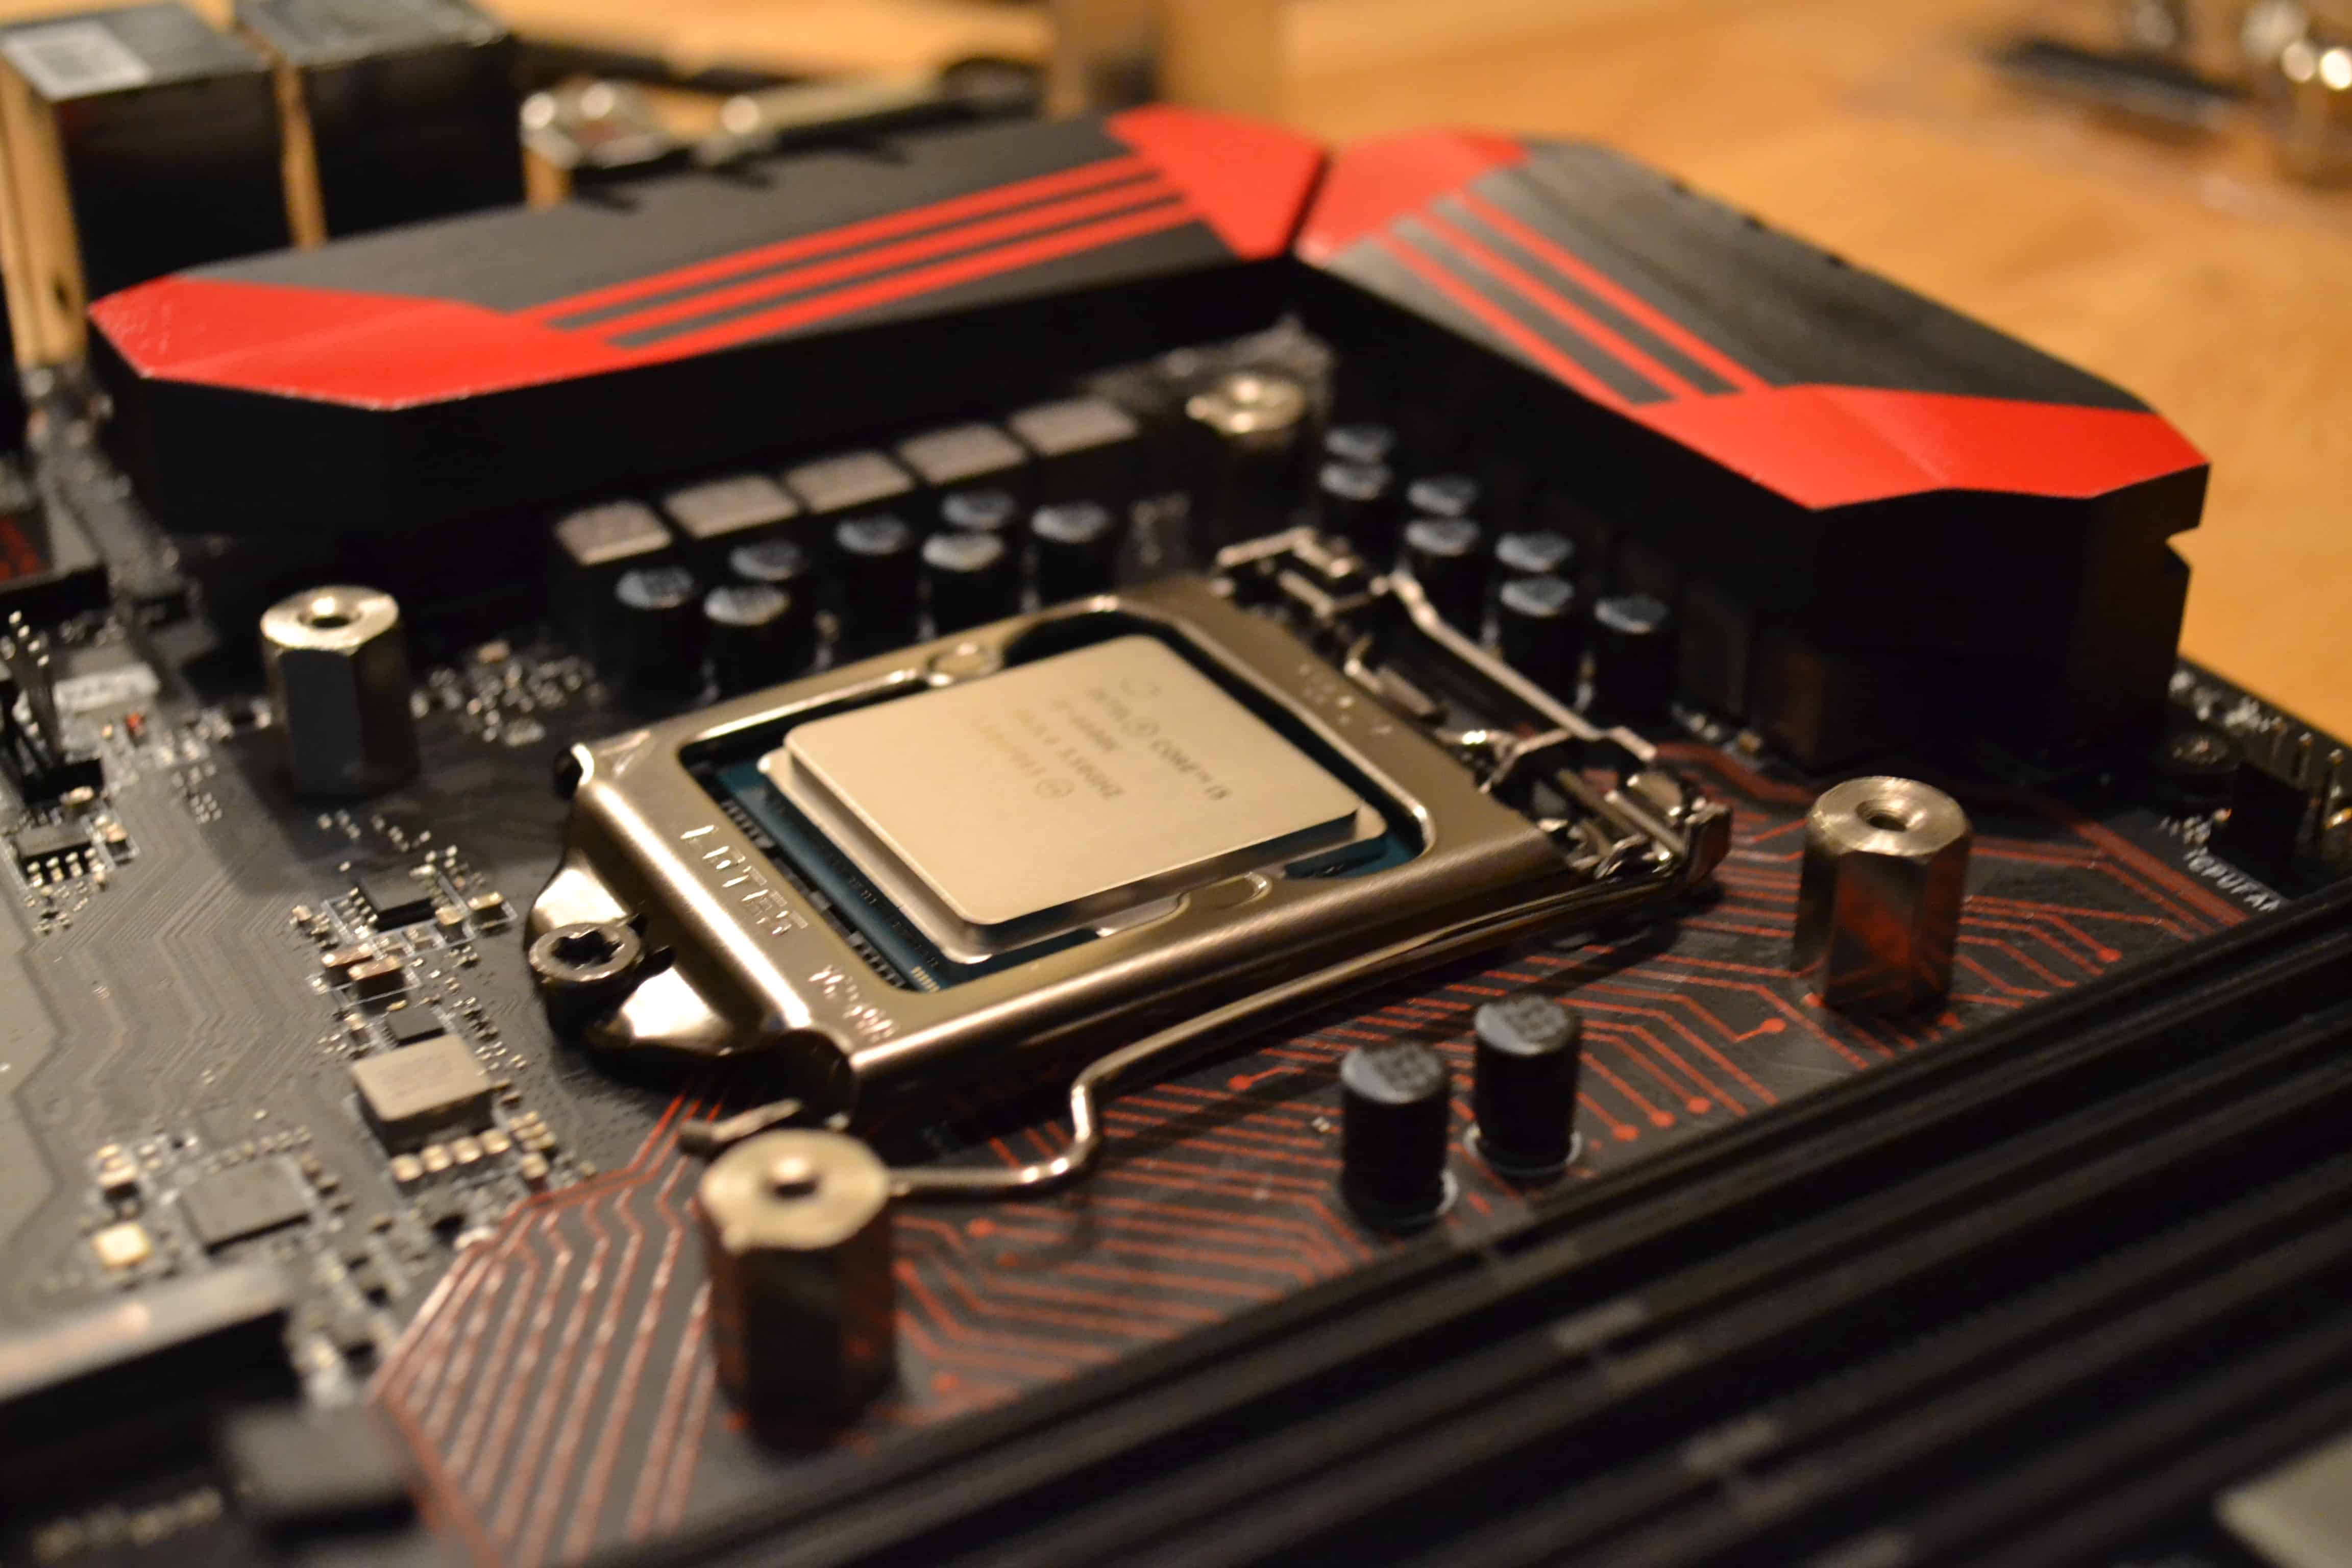 MSi Motherboard with i5-6600K Processor Locked – The Renegade Coder